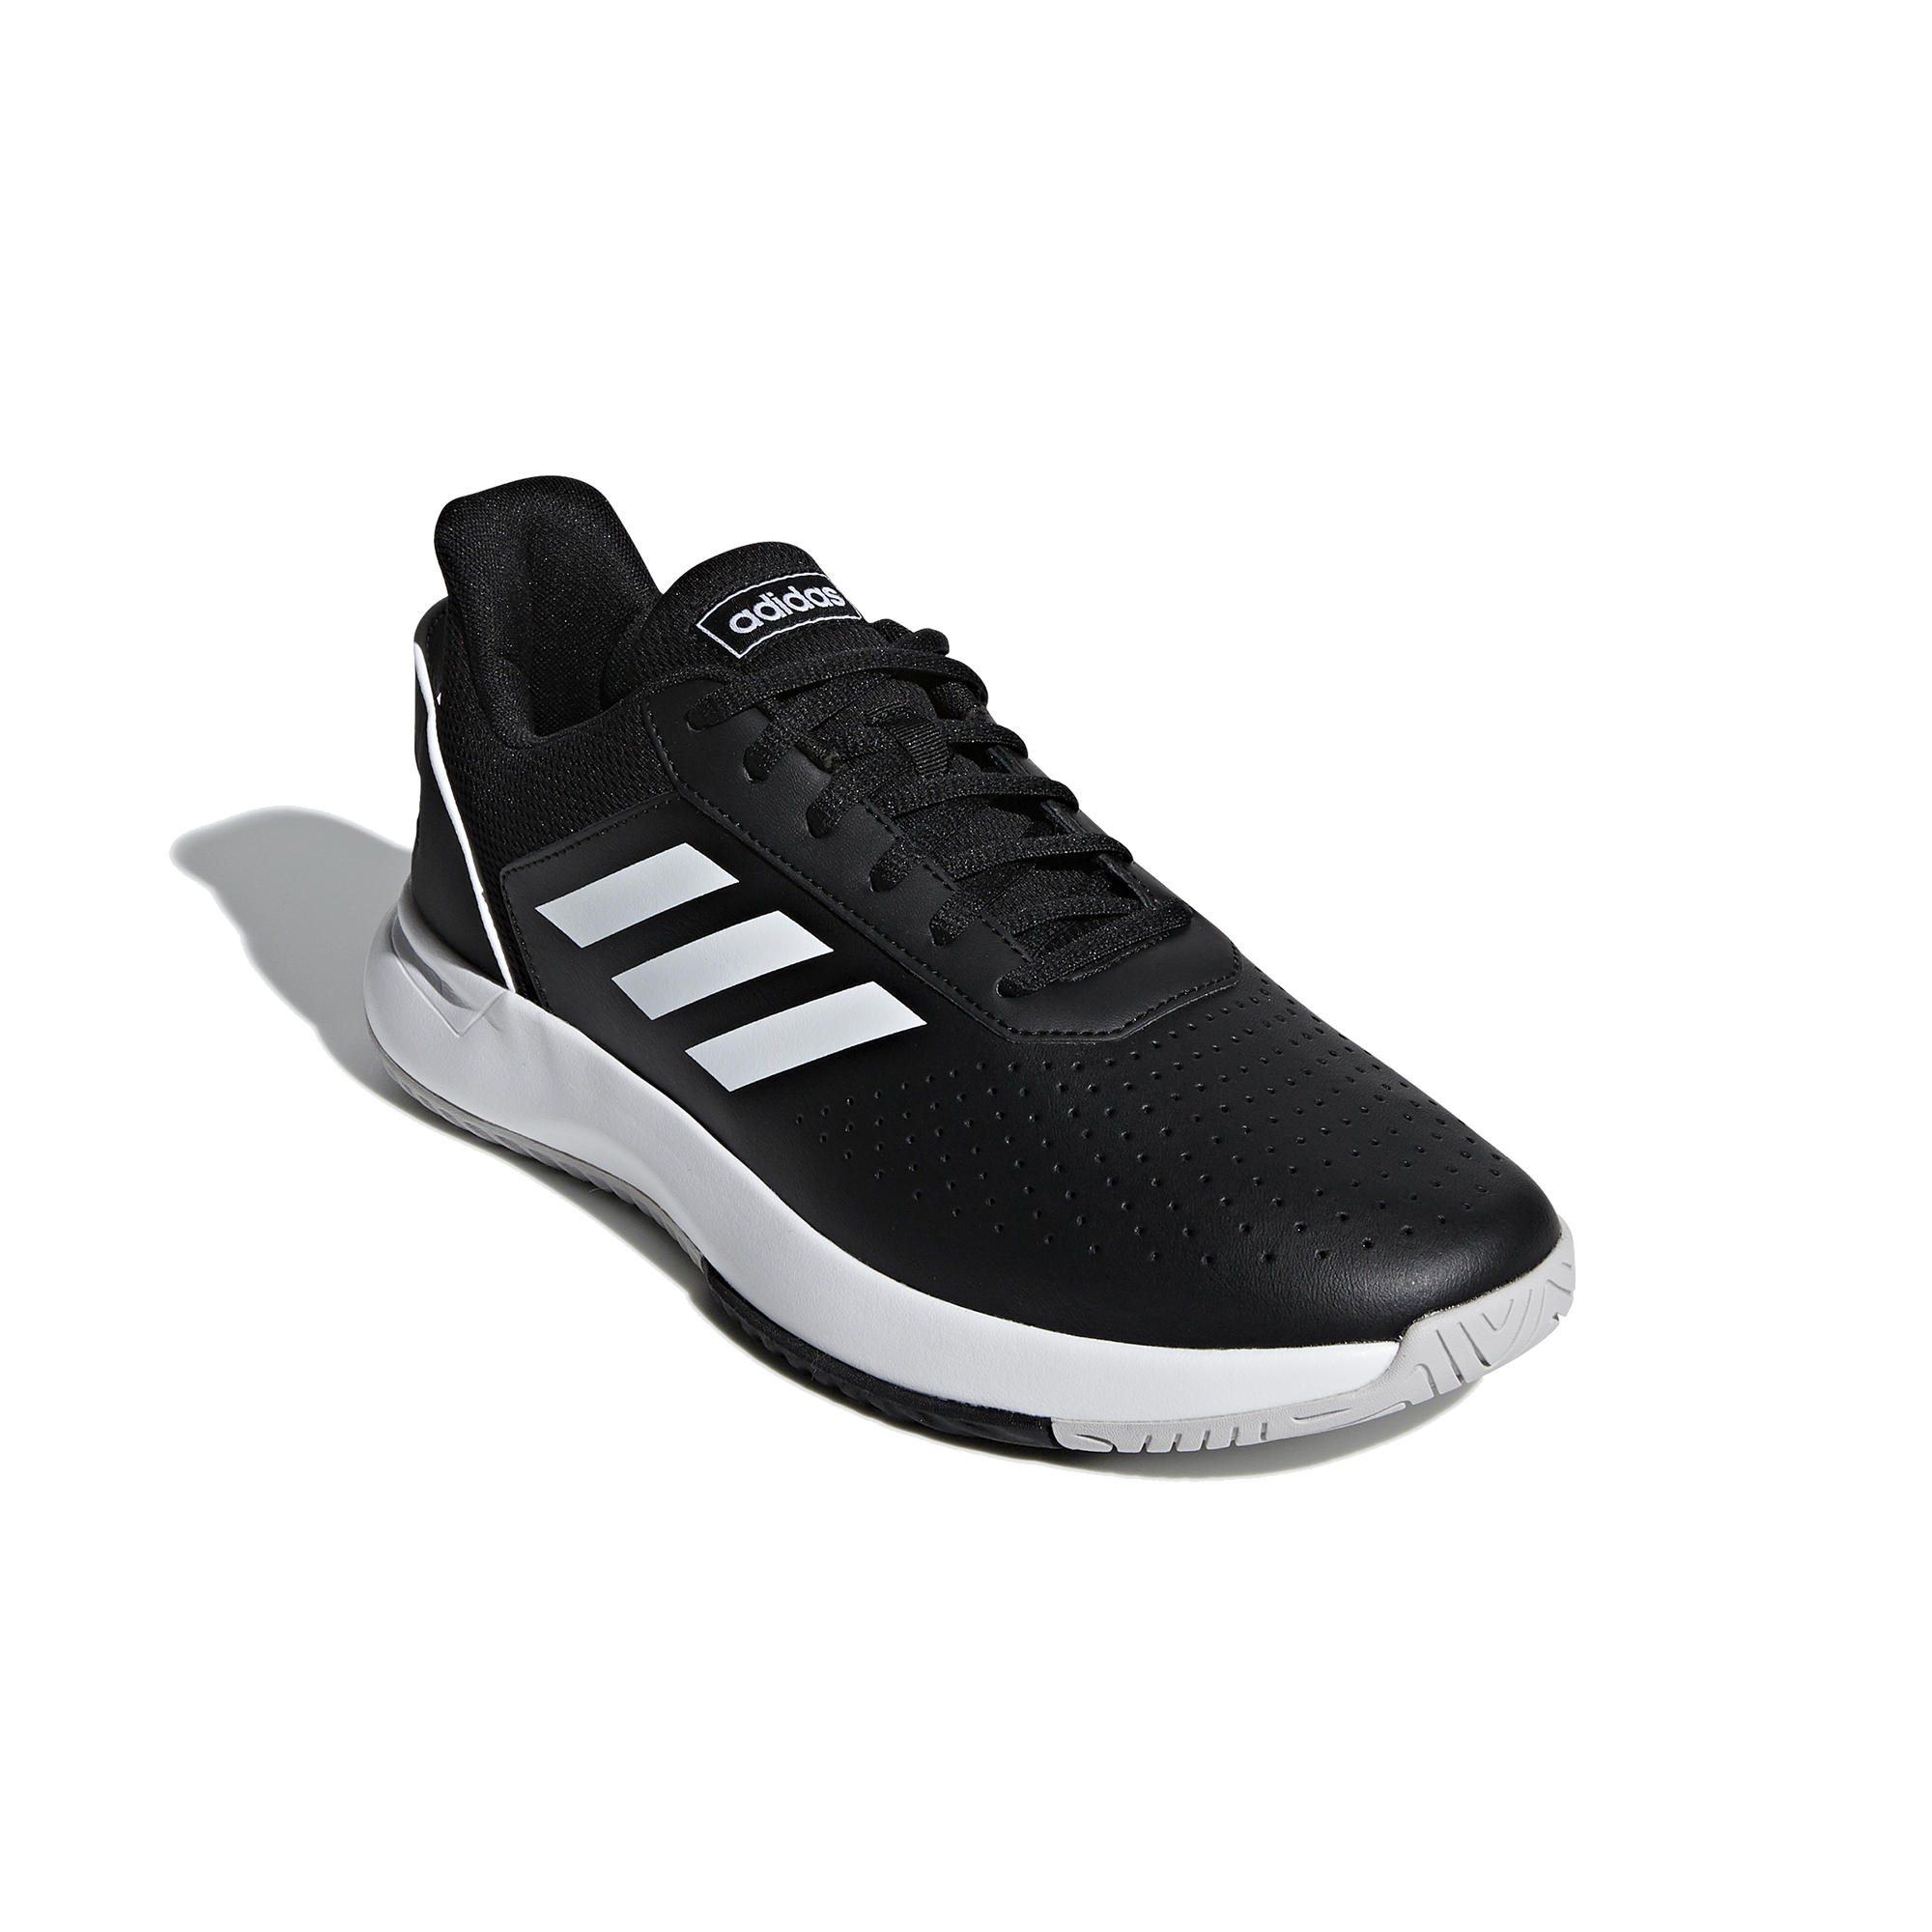 white and black adidas tennis shoes